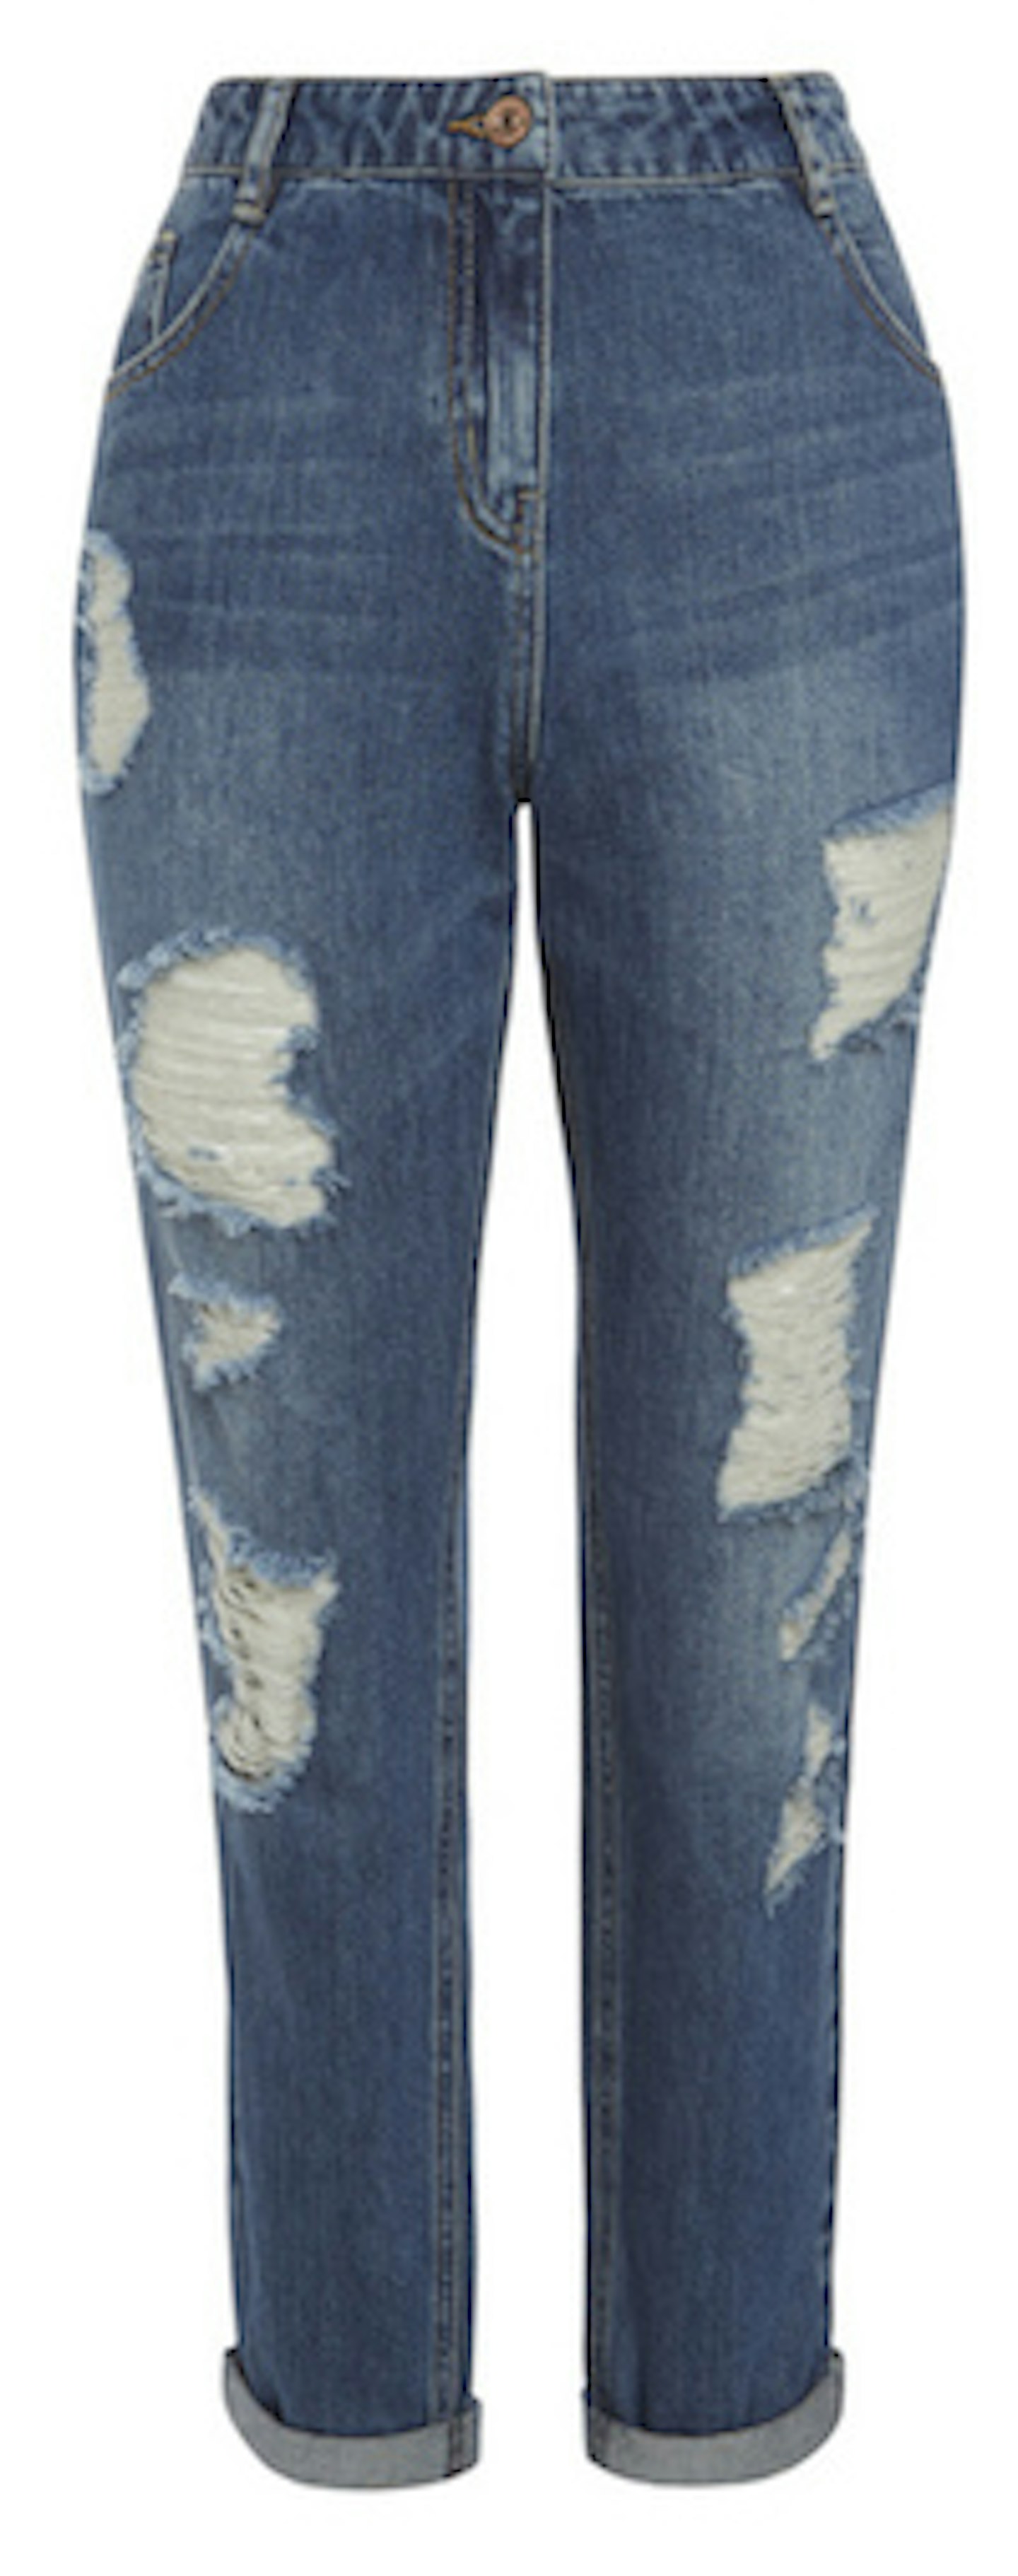 Distressed Jeans £18